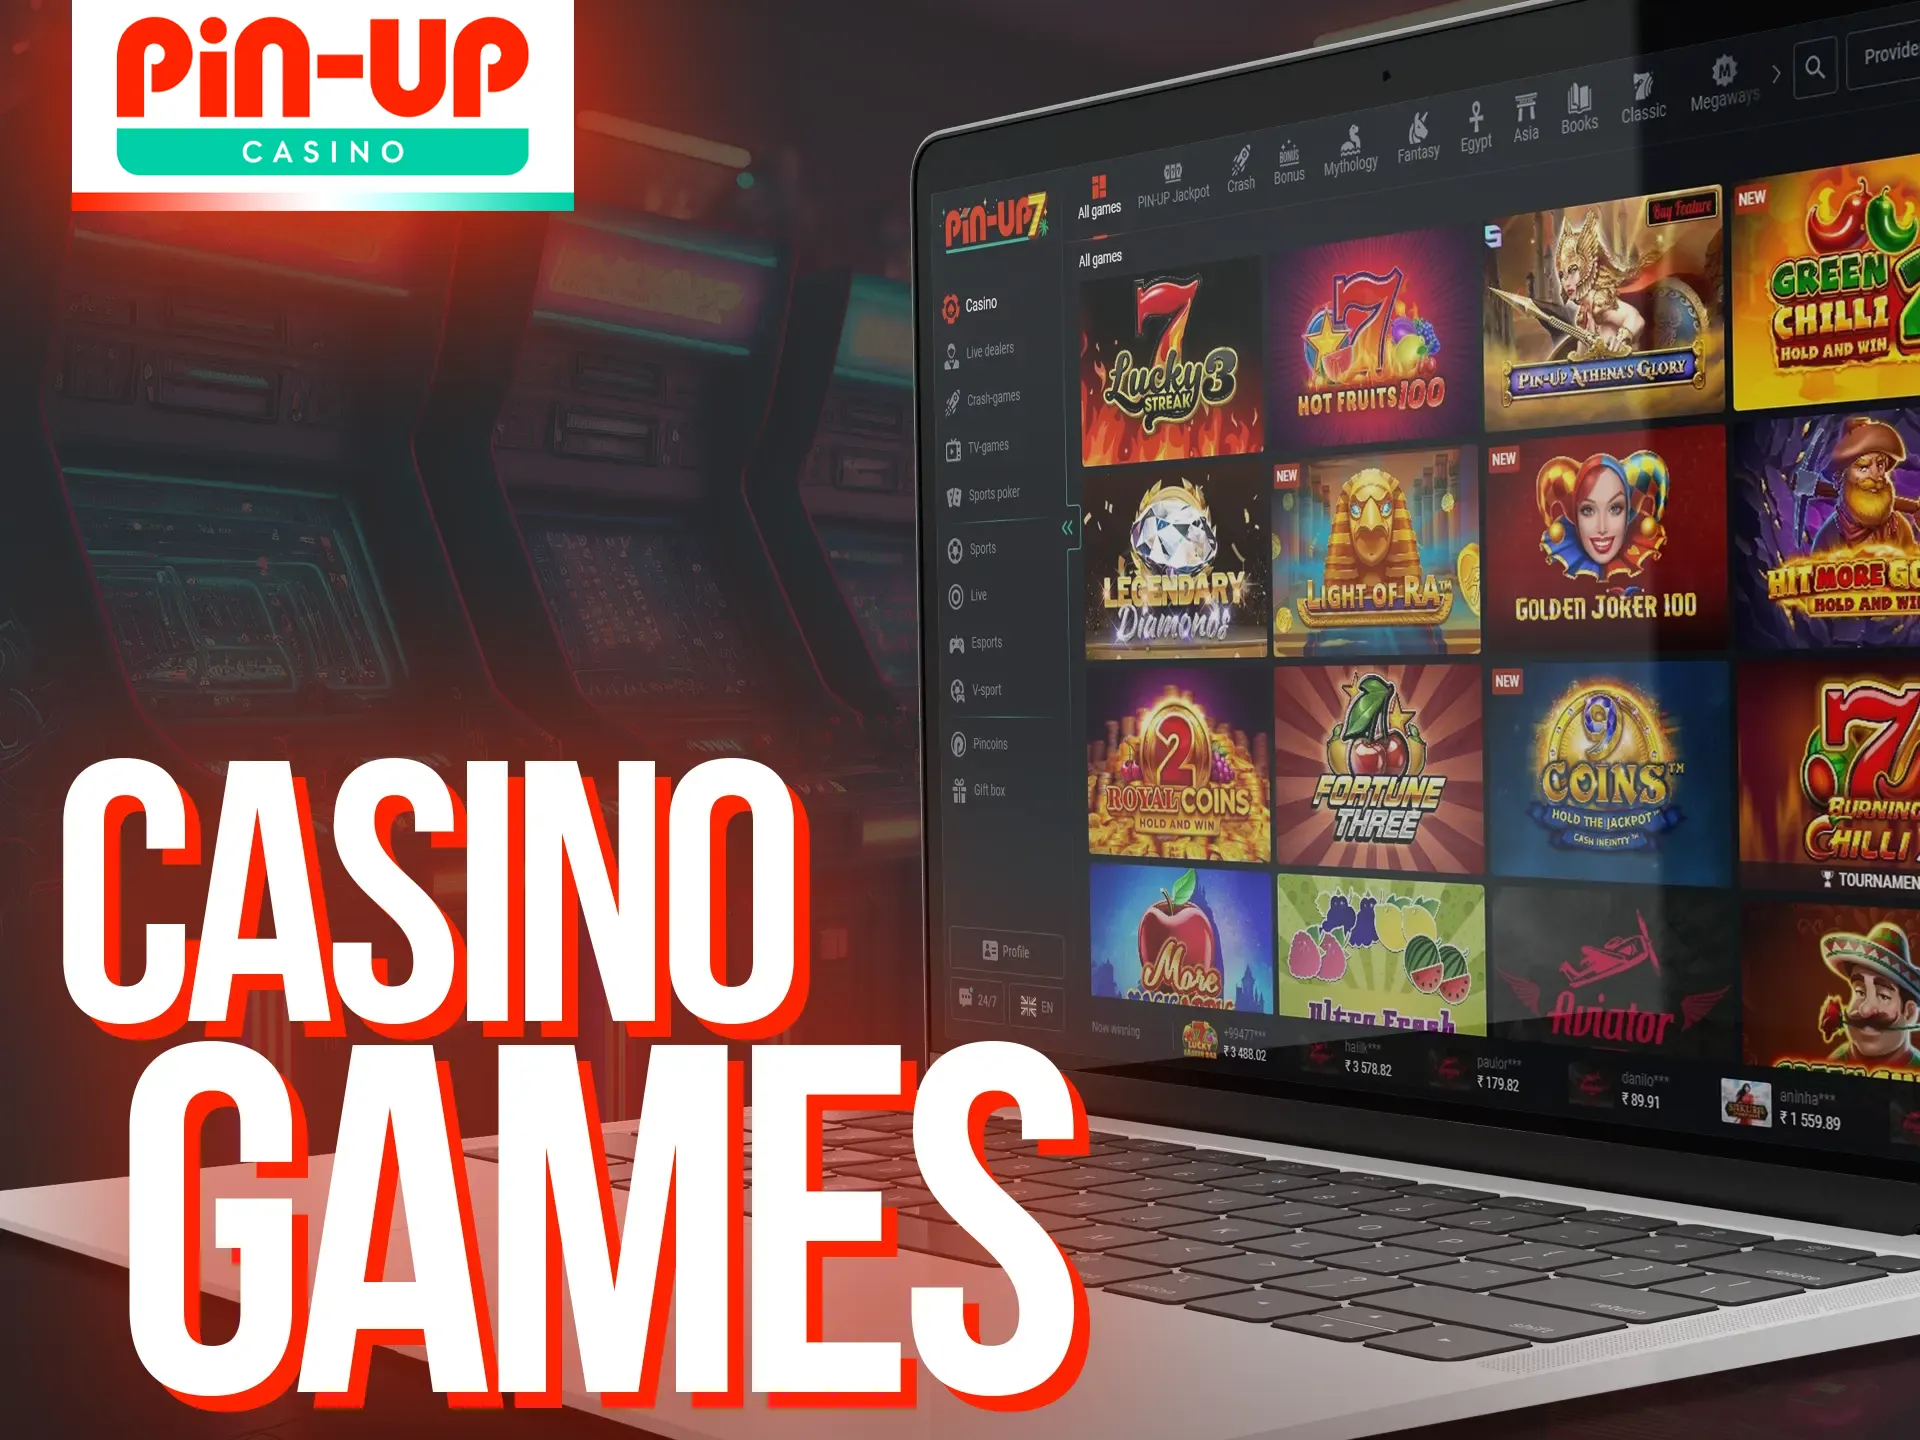 The casino has a variety of games to suit players' preferences.